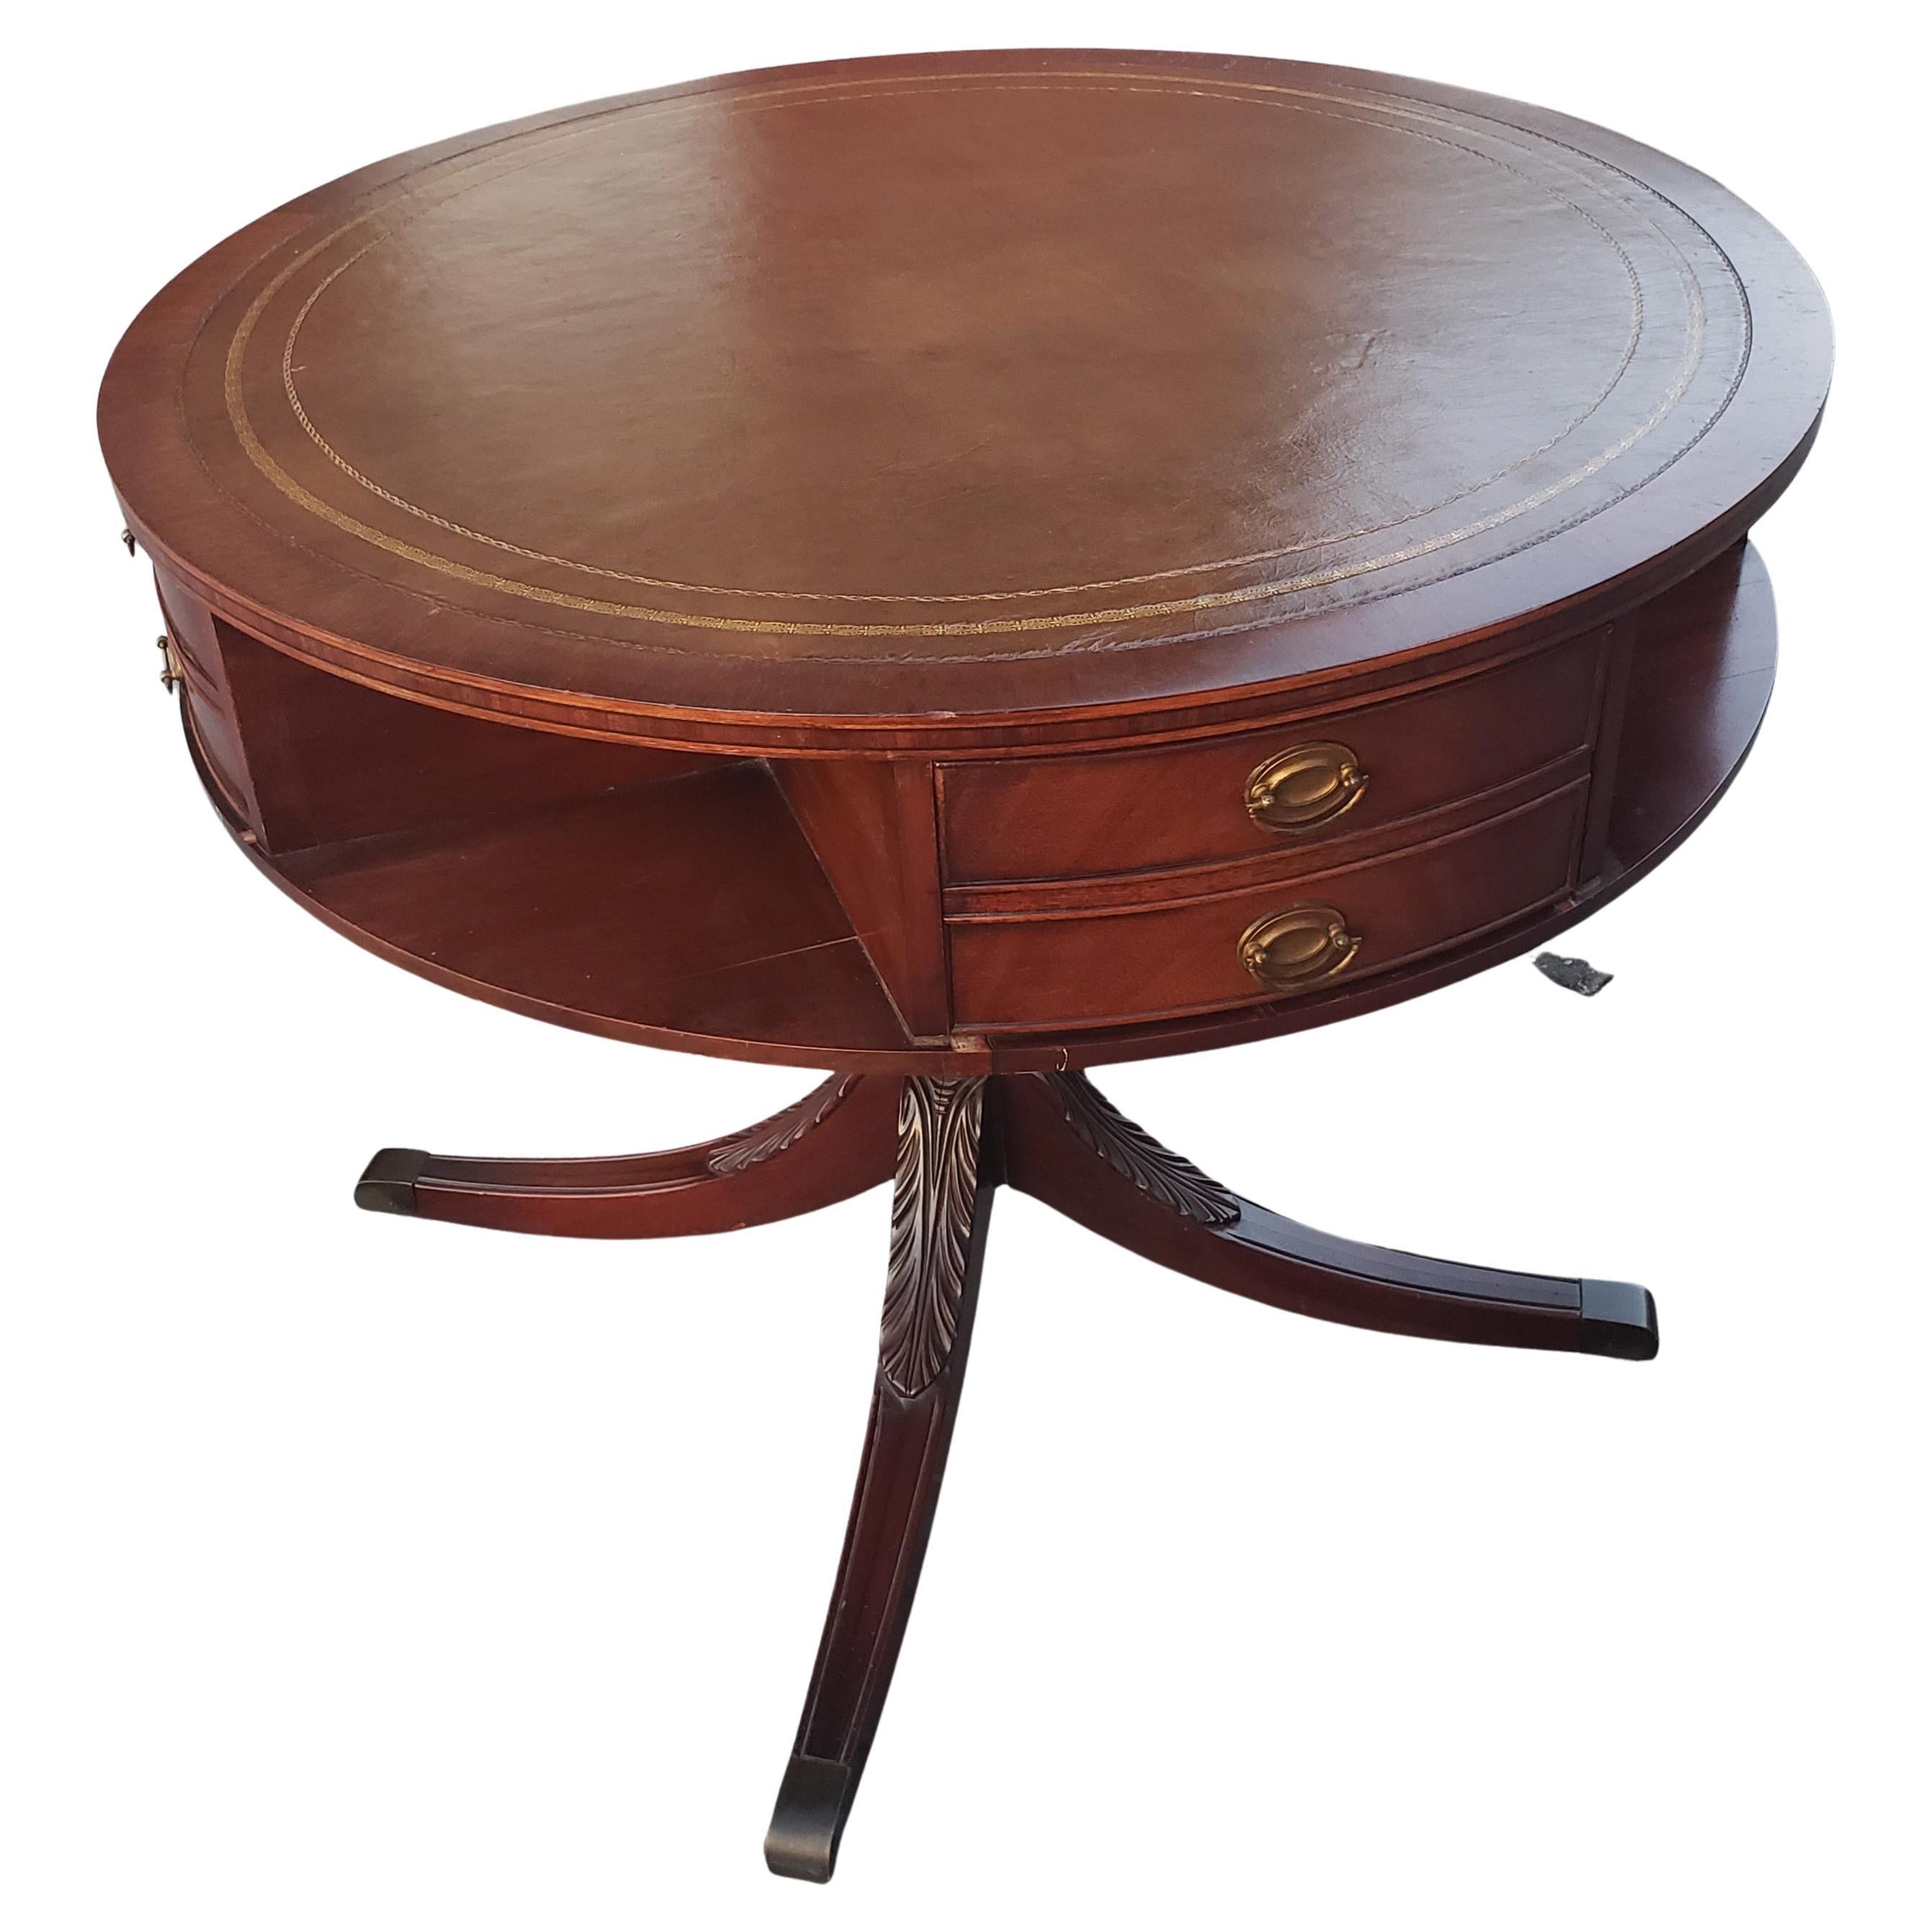 Banded Leather Stenciled Top Double Drum 4-drawer Mahogany Center Table, C 1940s In Good Condition For Sale In Germantown, MD